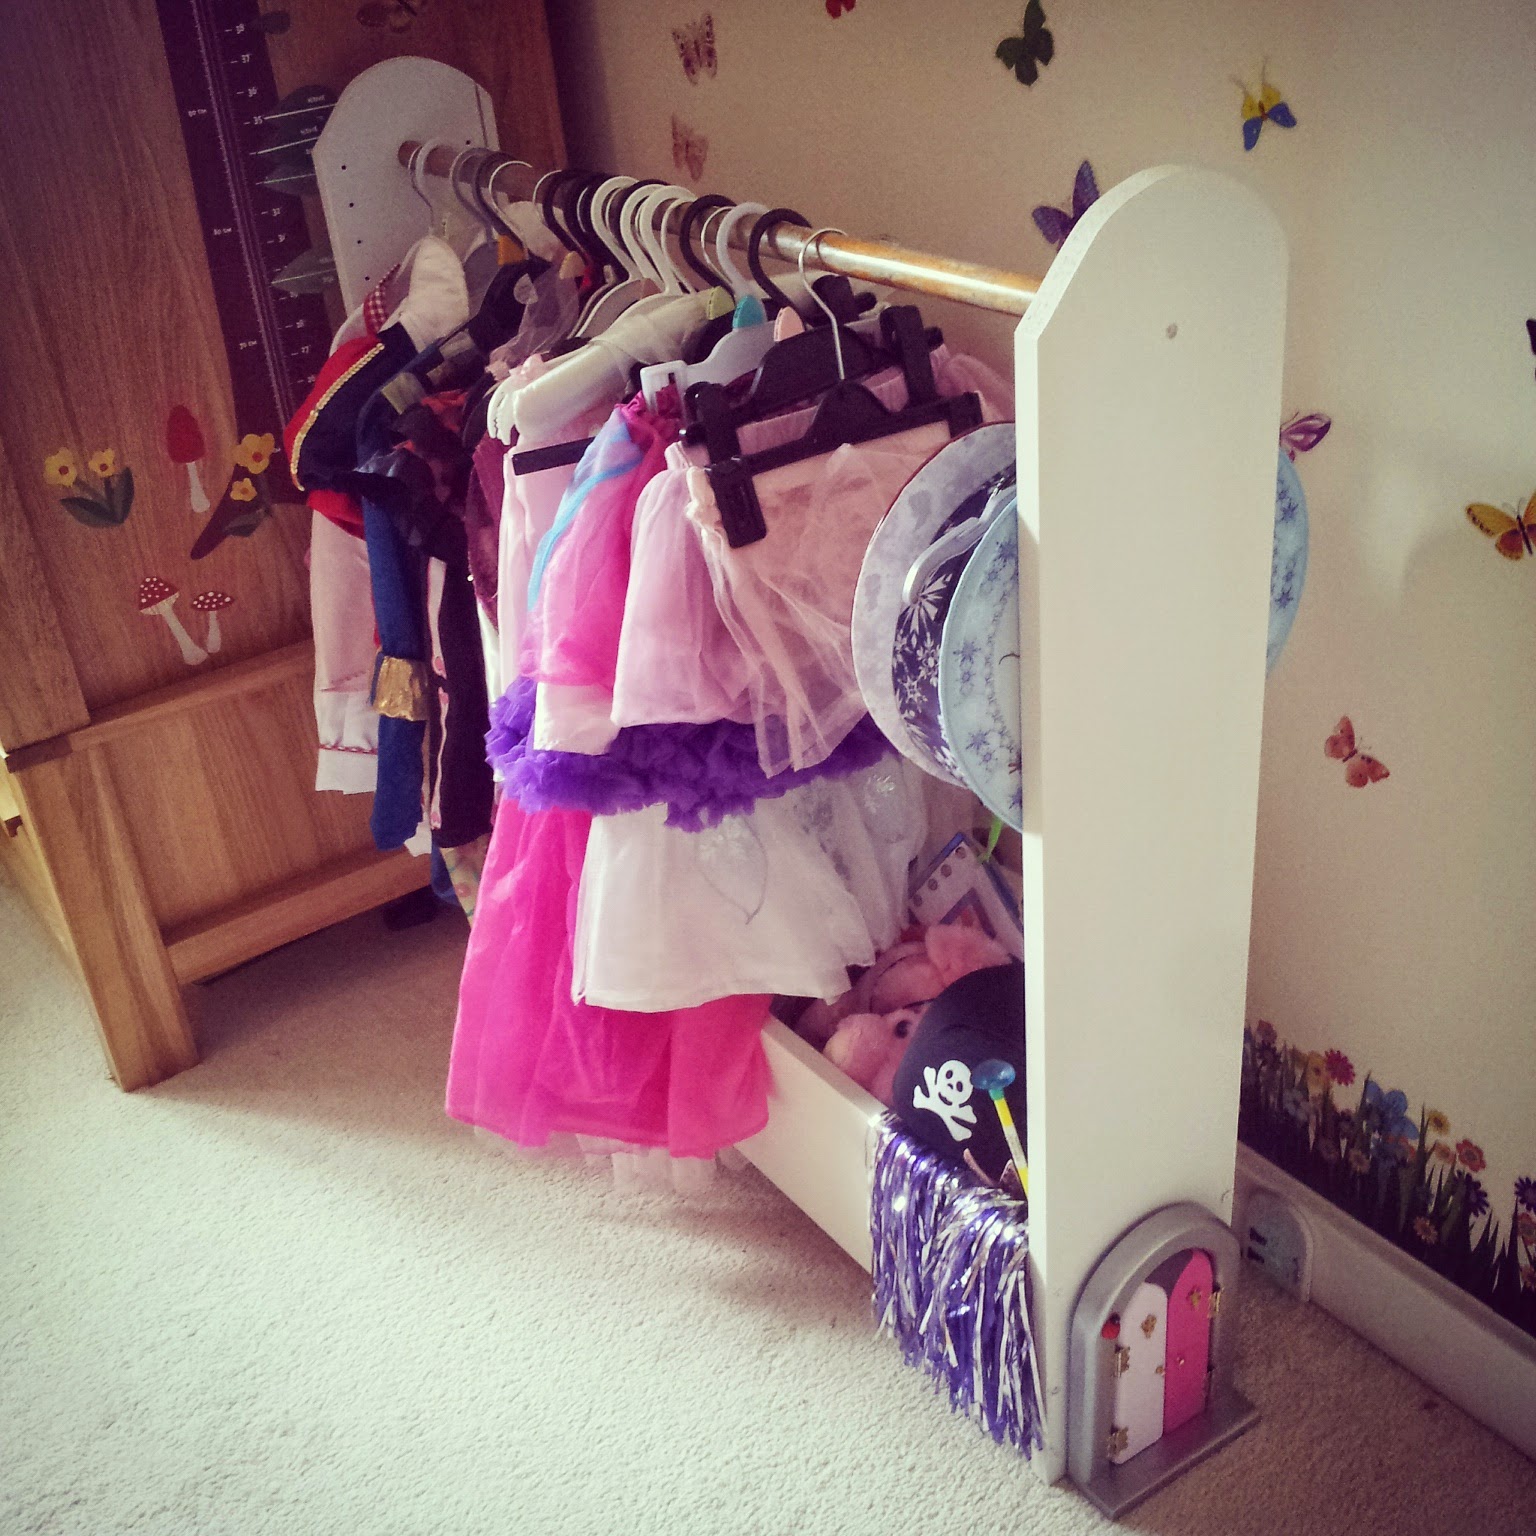 JoMama Craft: Fancy Dress Clothes Rack..from a CD storage unit?